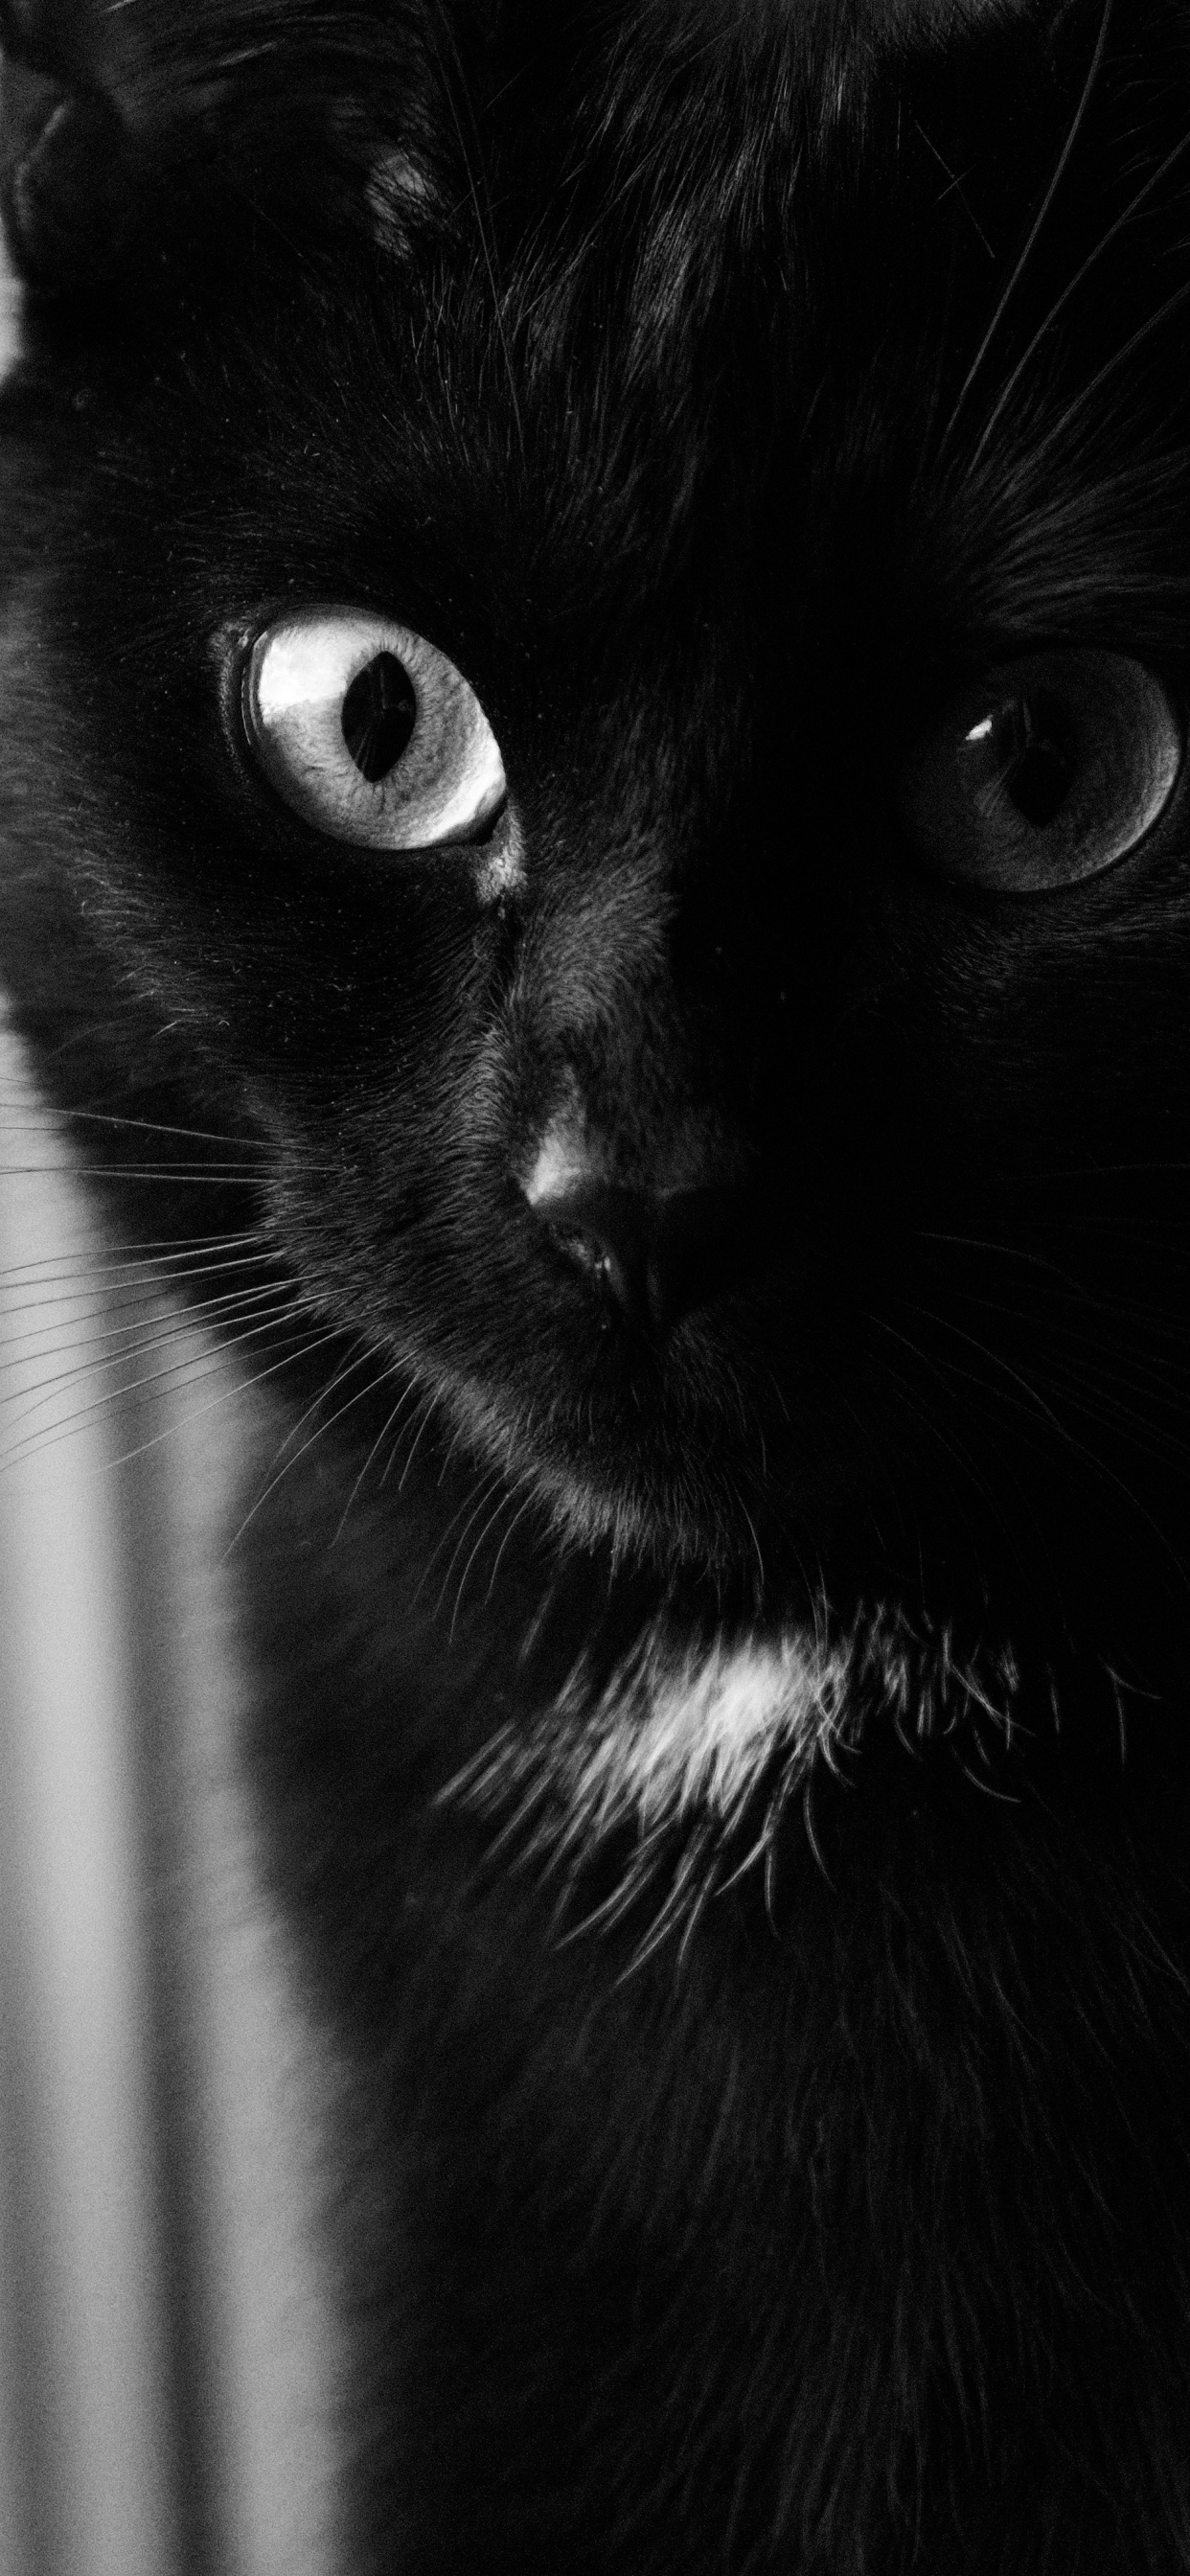 Black Cat in Grayscale Photography. Wallpaper in 1242x2688 Resolution